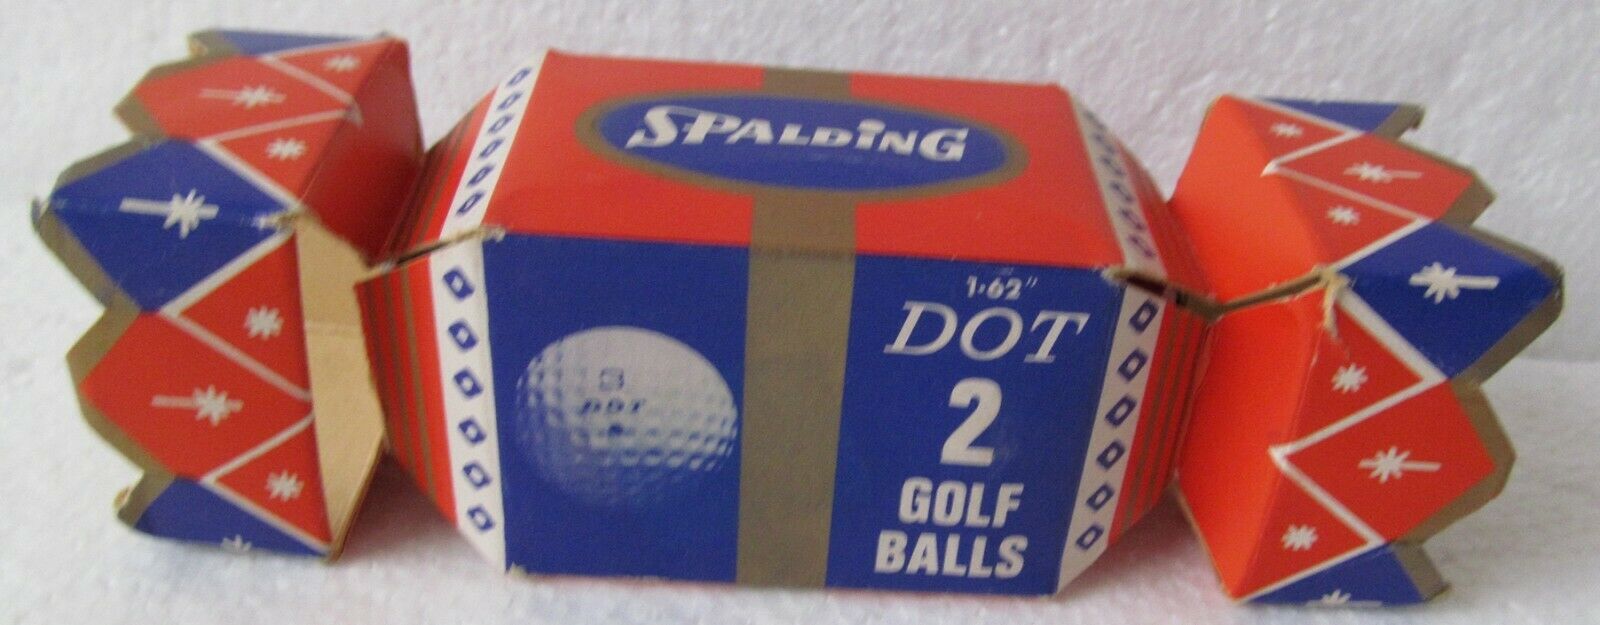 2 WRAPPED SPALDING DOT 1.62 DIMPLE GOLF BALLS IN COLORFUL X-MAS PACKAGING